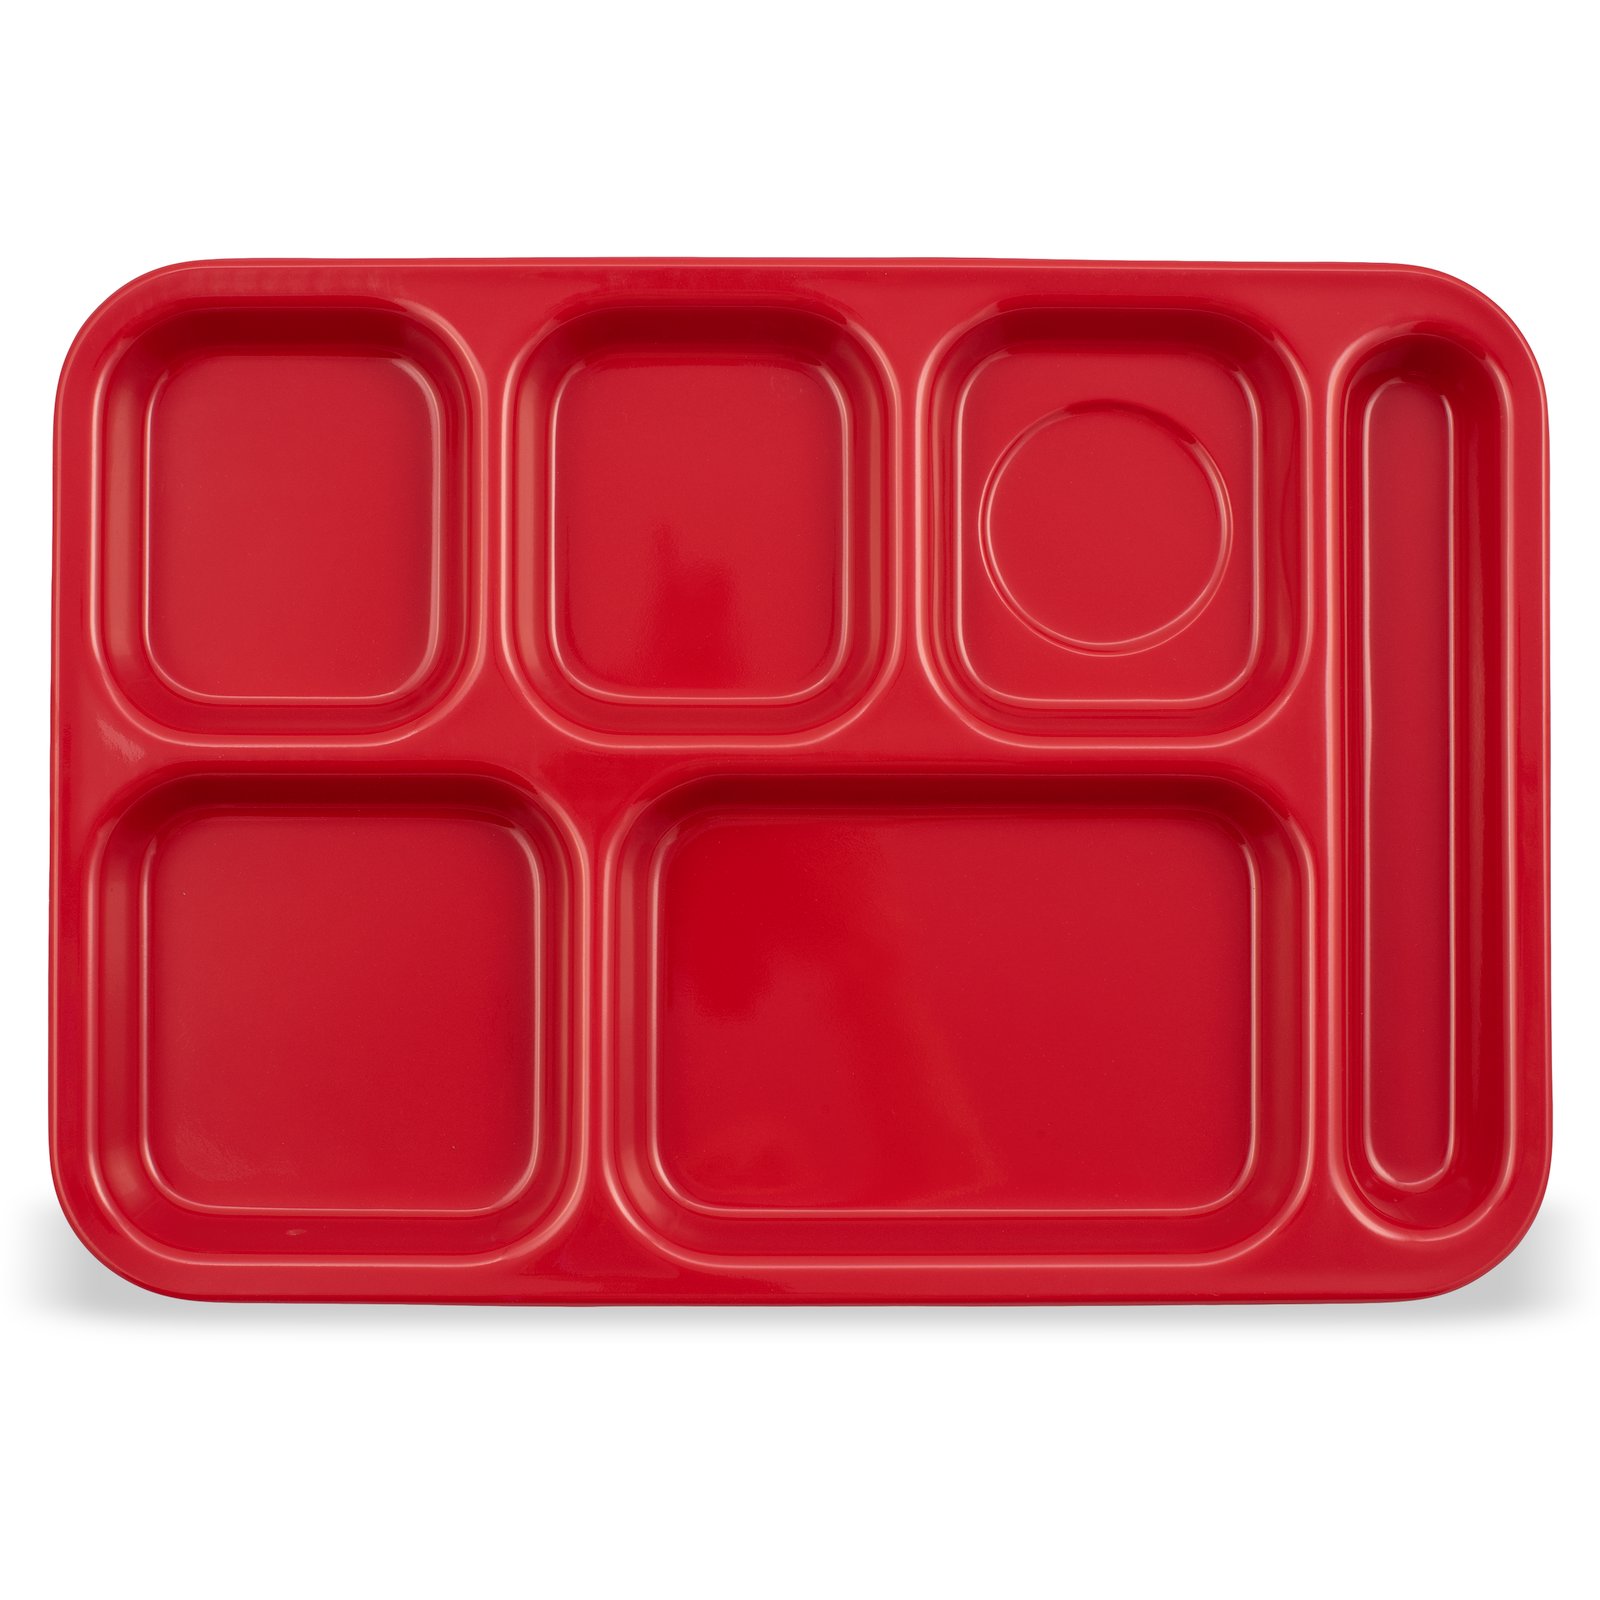 484 - school cafeteria trays, 6-compartment, 10 x 14.5, pink and